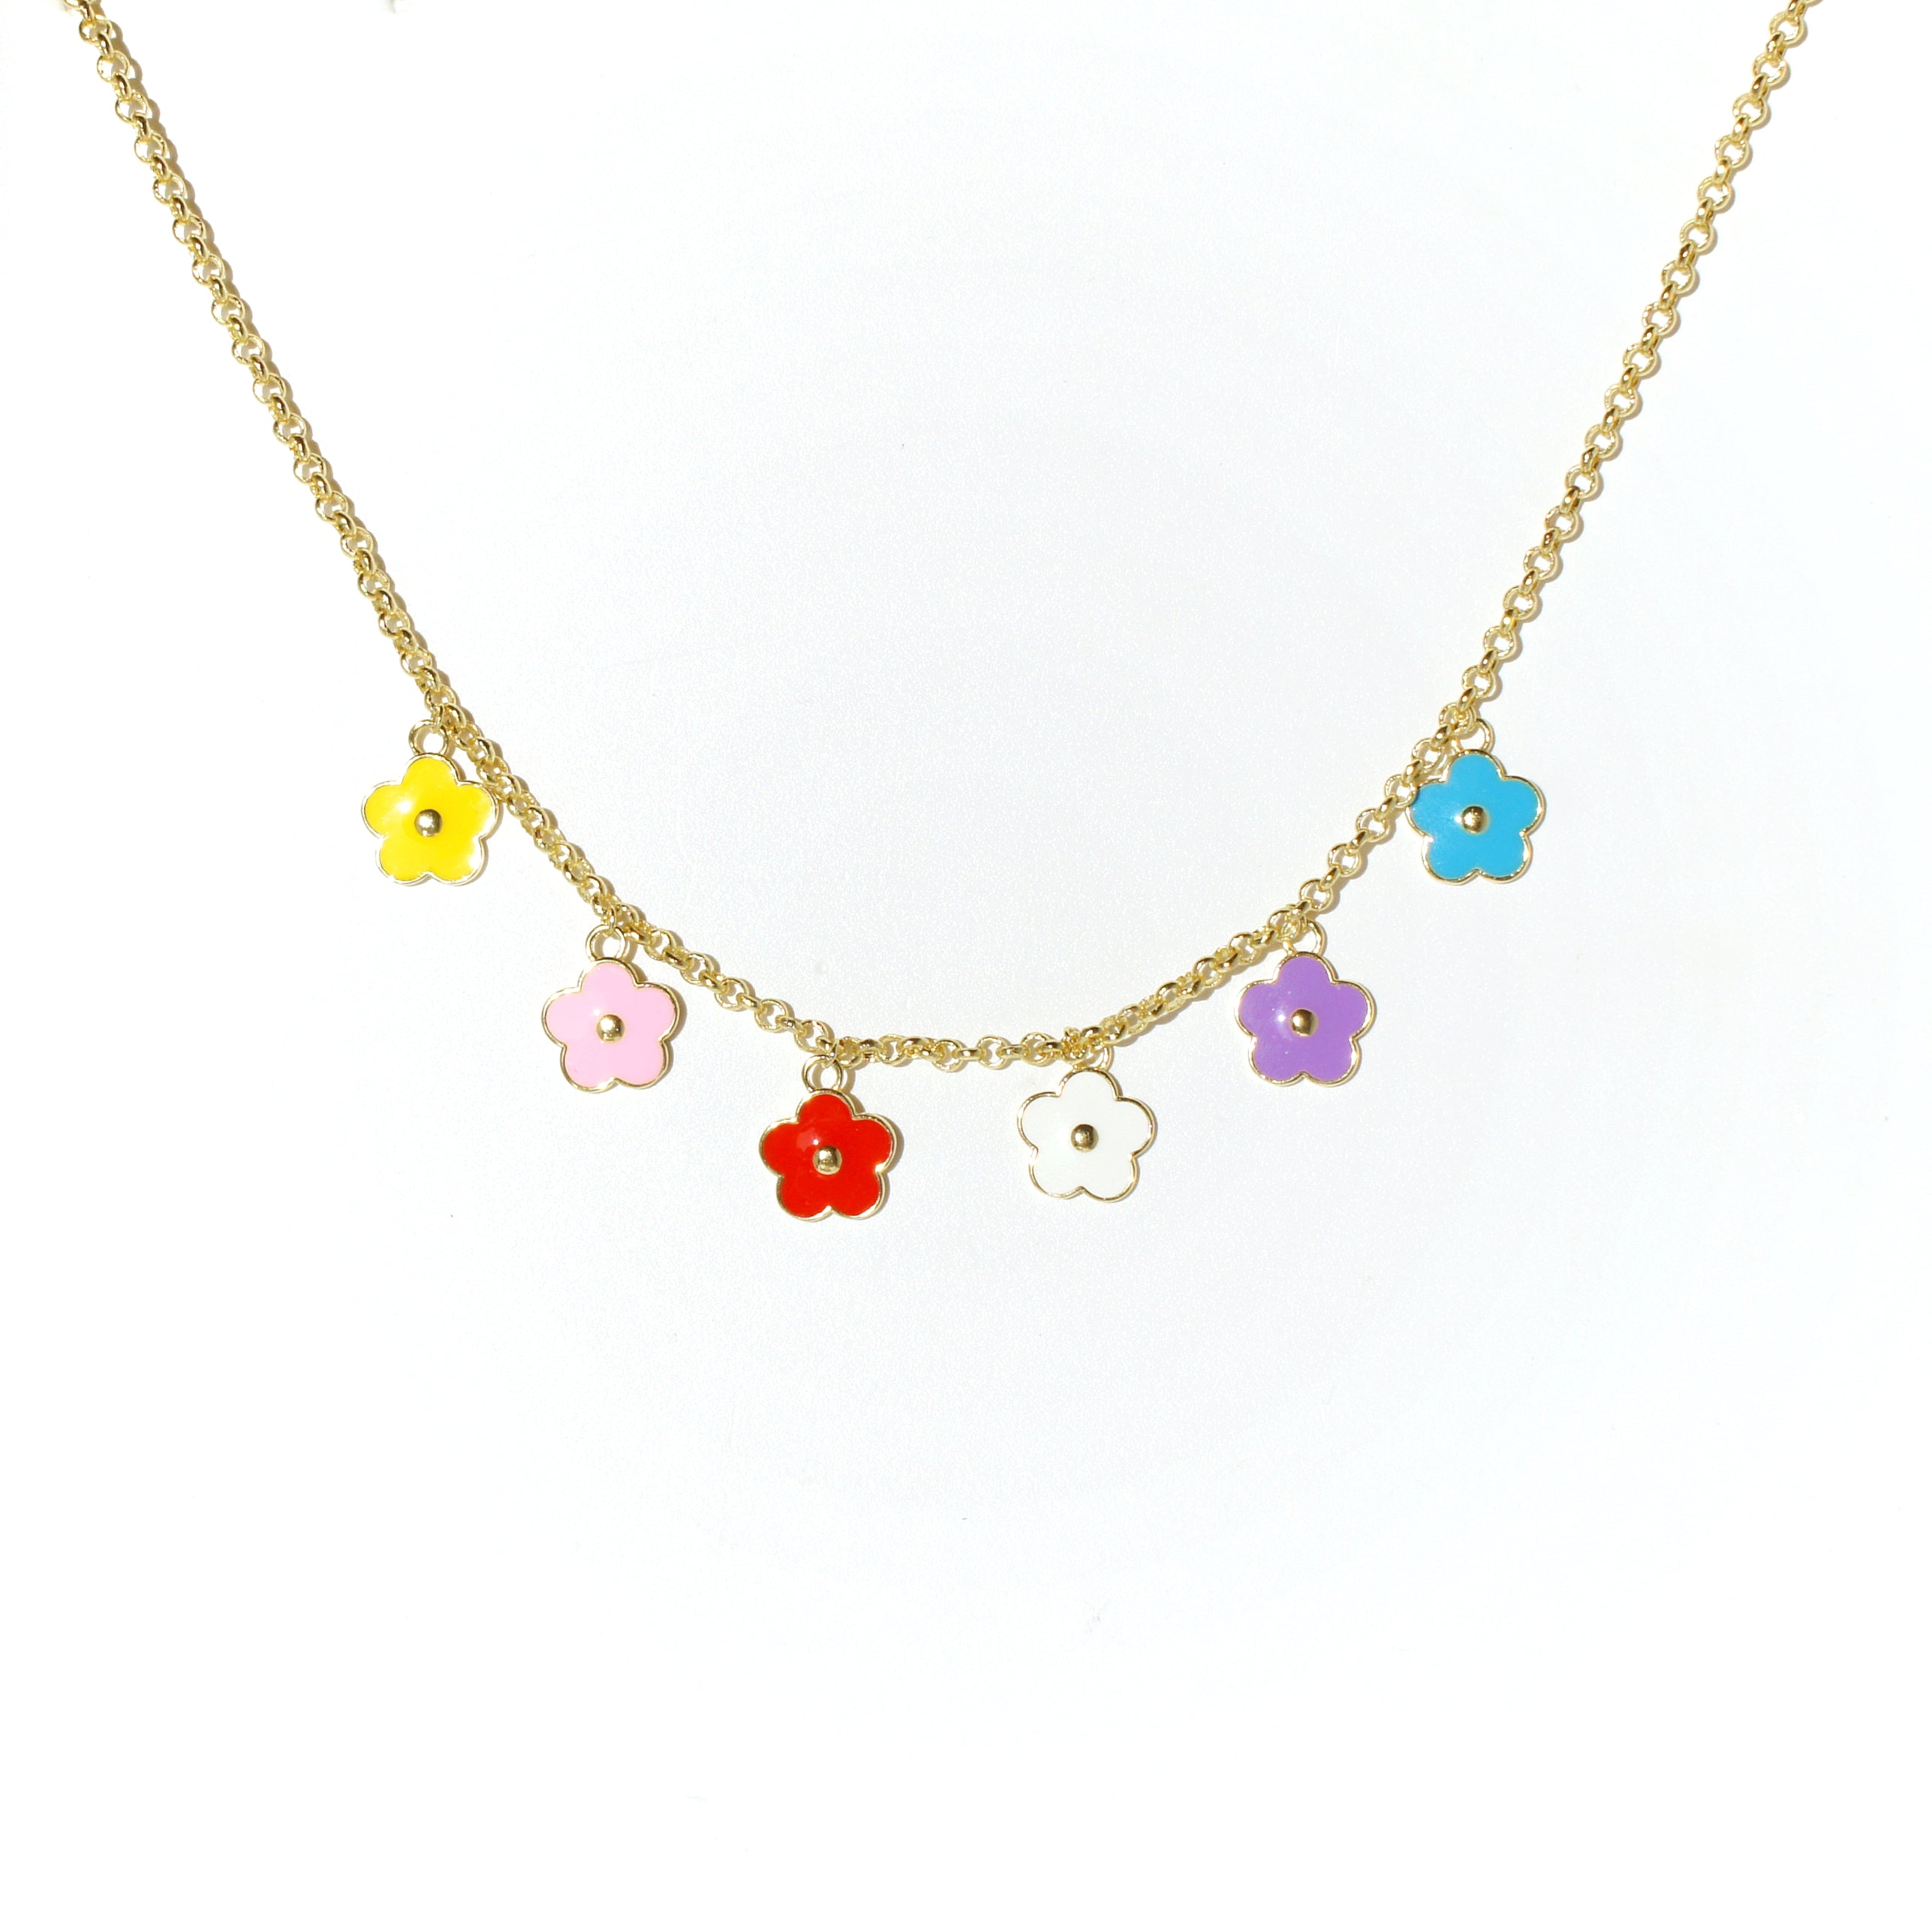 Flower Power Chain Necklace with Enamel Flower Charms